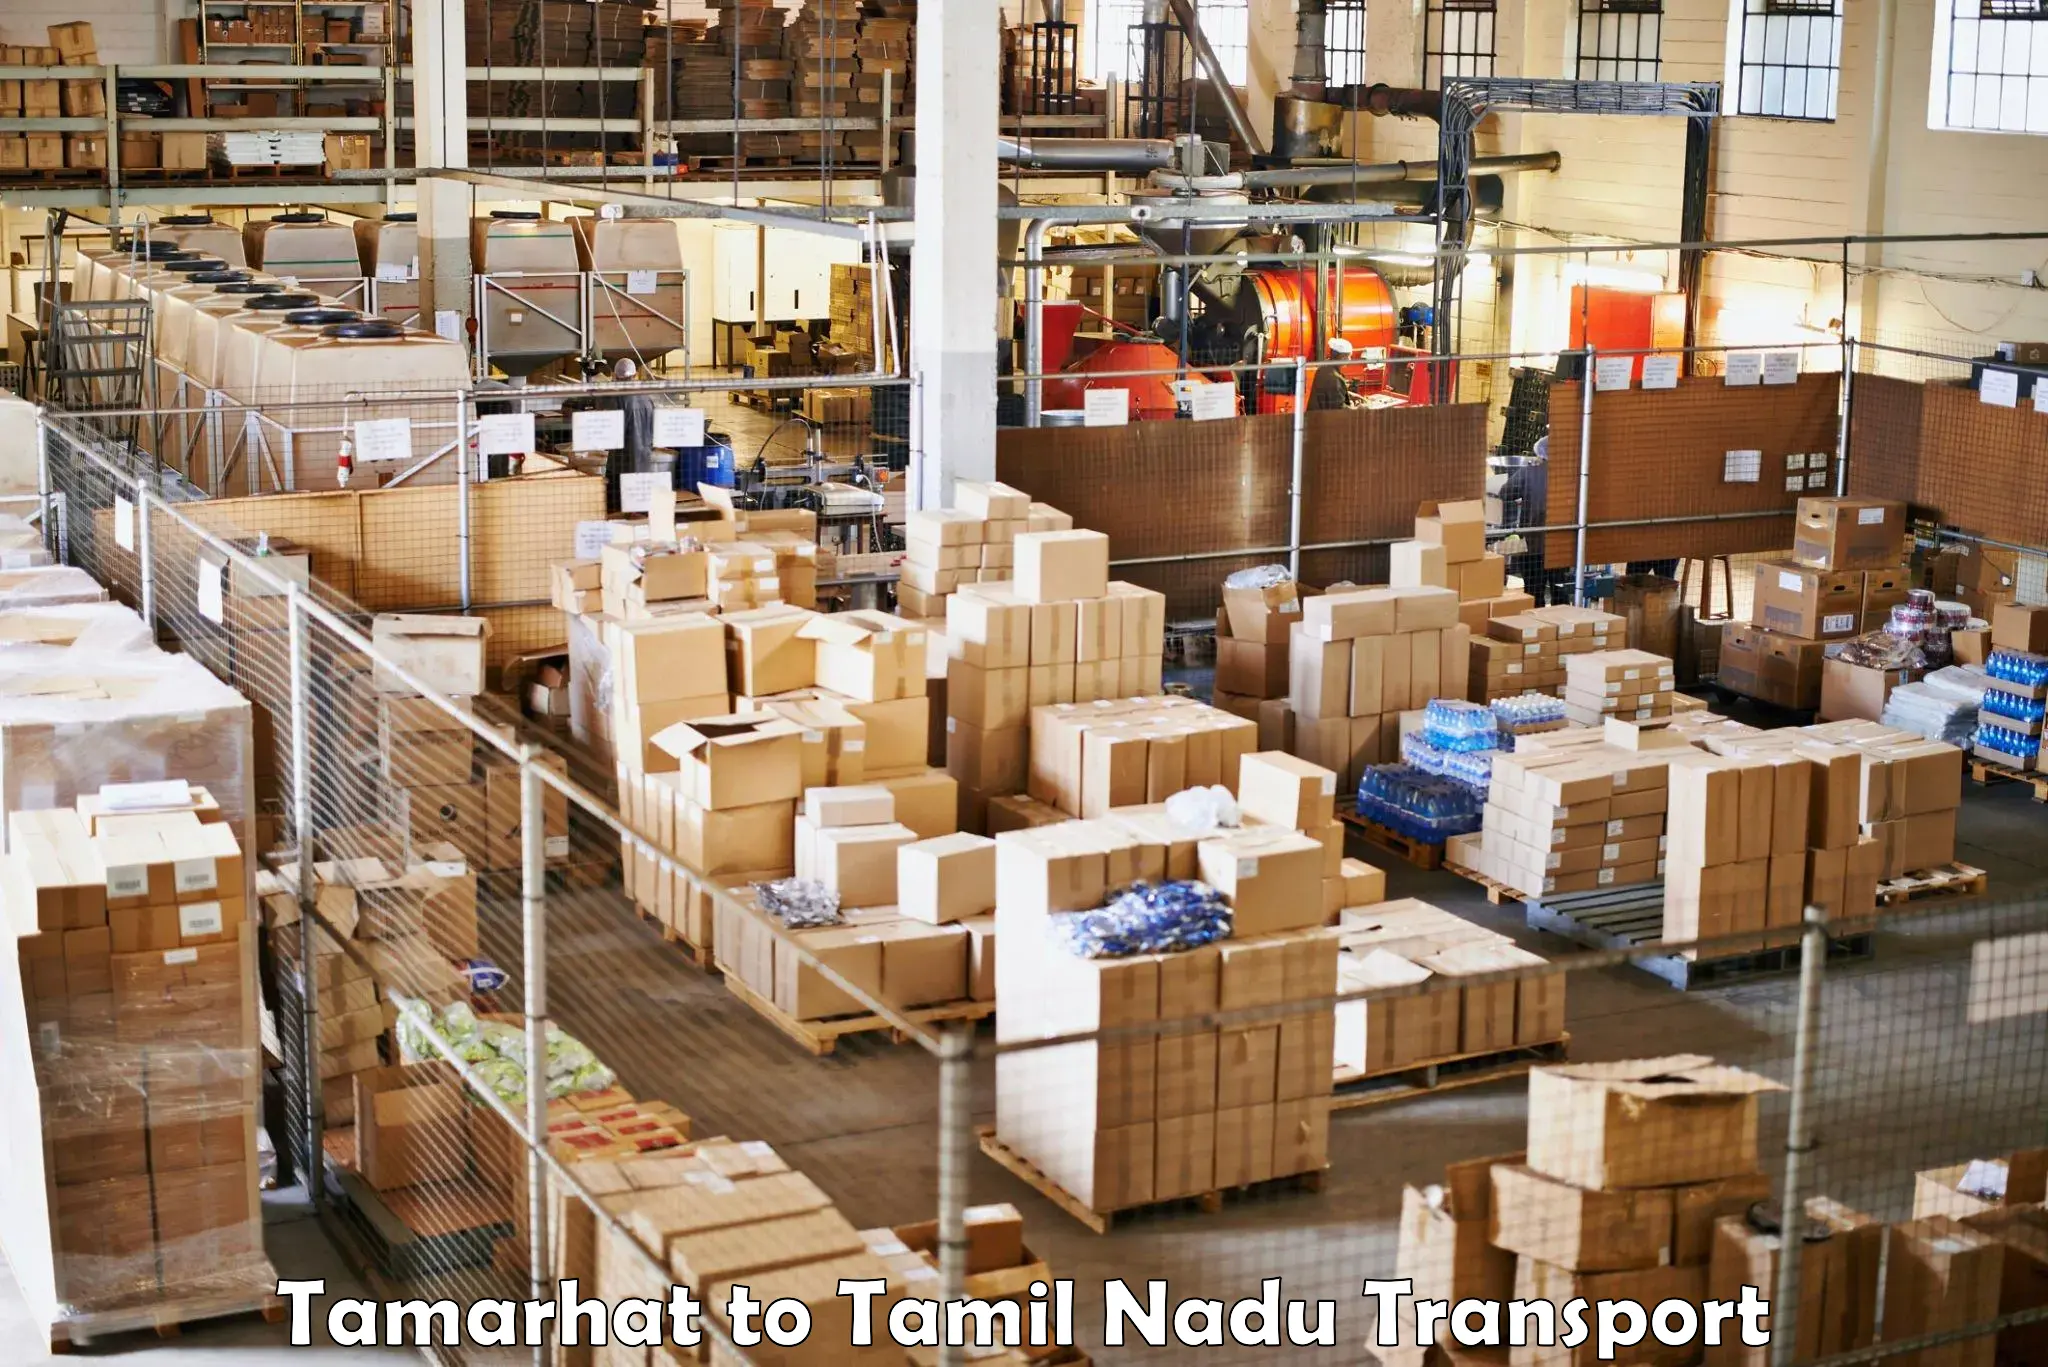 Air cargo transport services Tamarhat to Muthukulathur